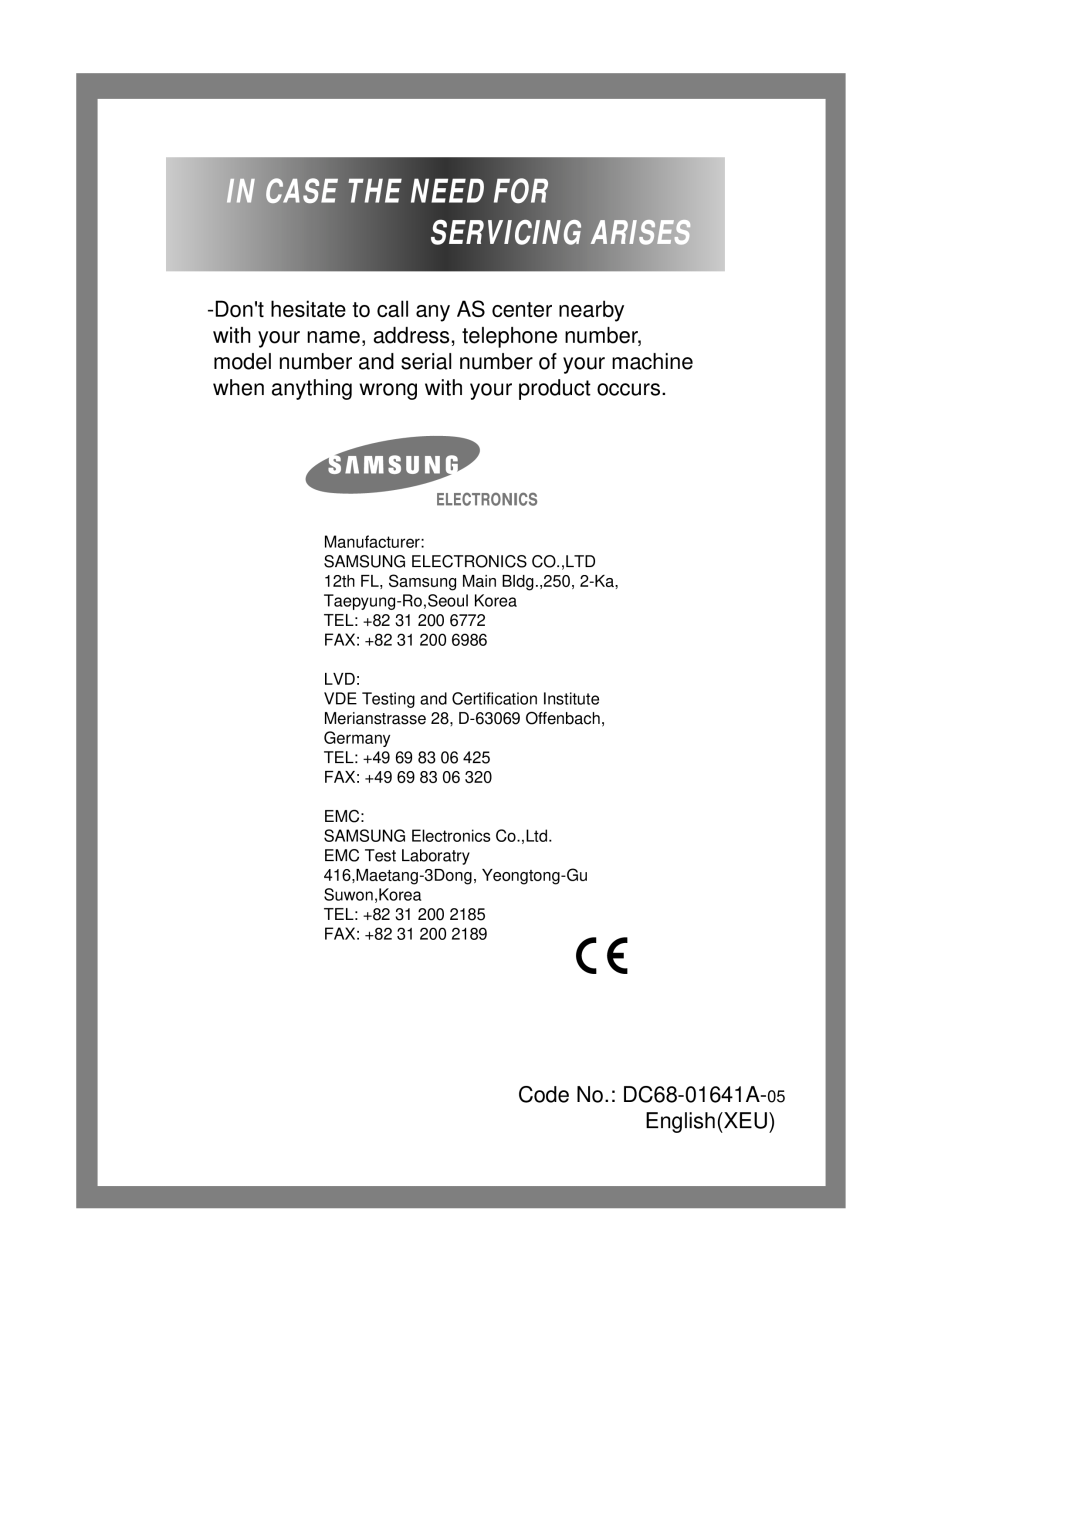 Samsung Q1435VGW1/YLE, Q1435VGW1/XEF, Q1636VGW/XEF, Q1435VGW1-XEF, Q1435VGW1-XEE manual In Case The Need For Servicing Arises 